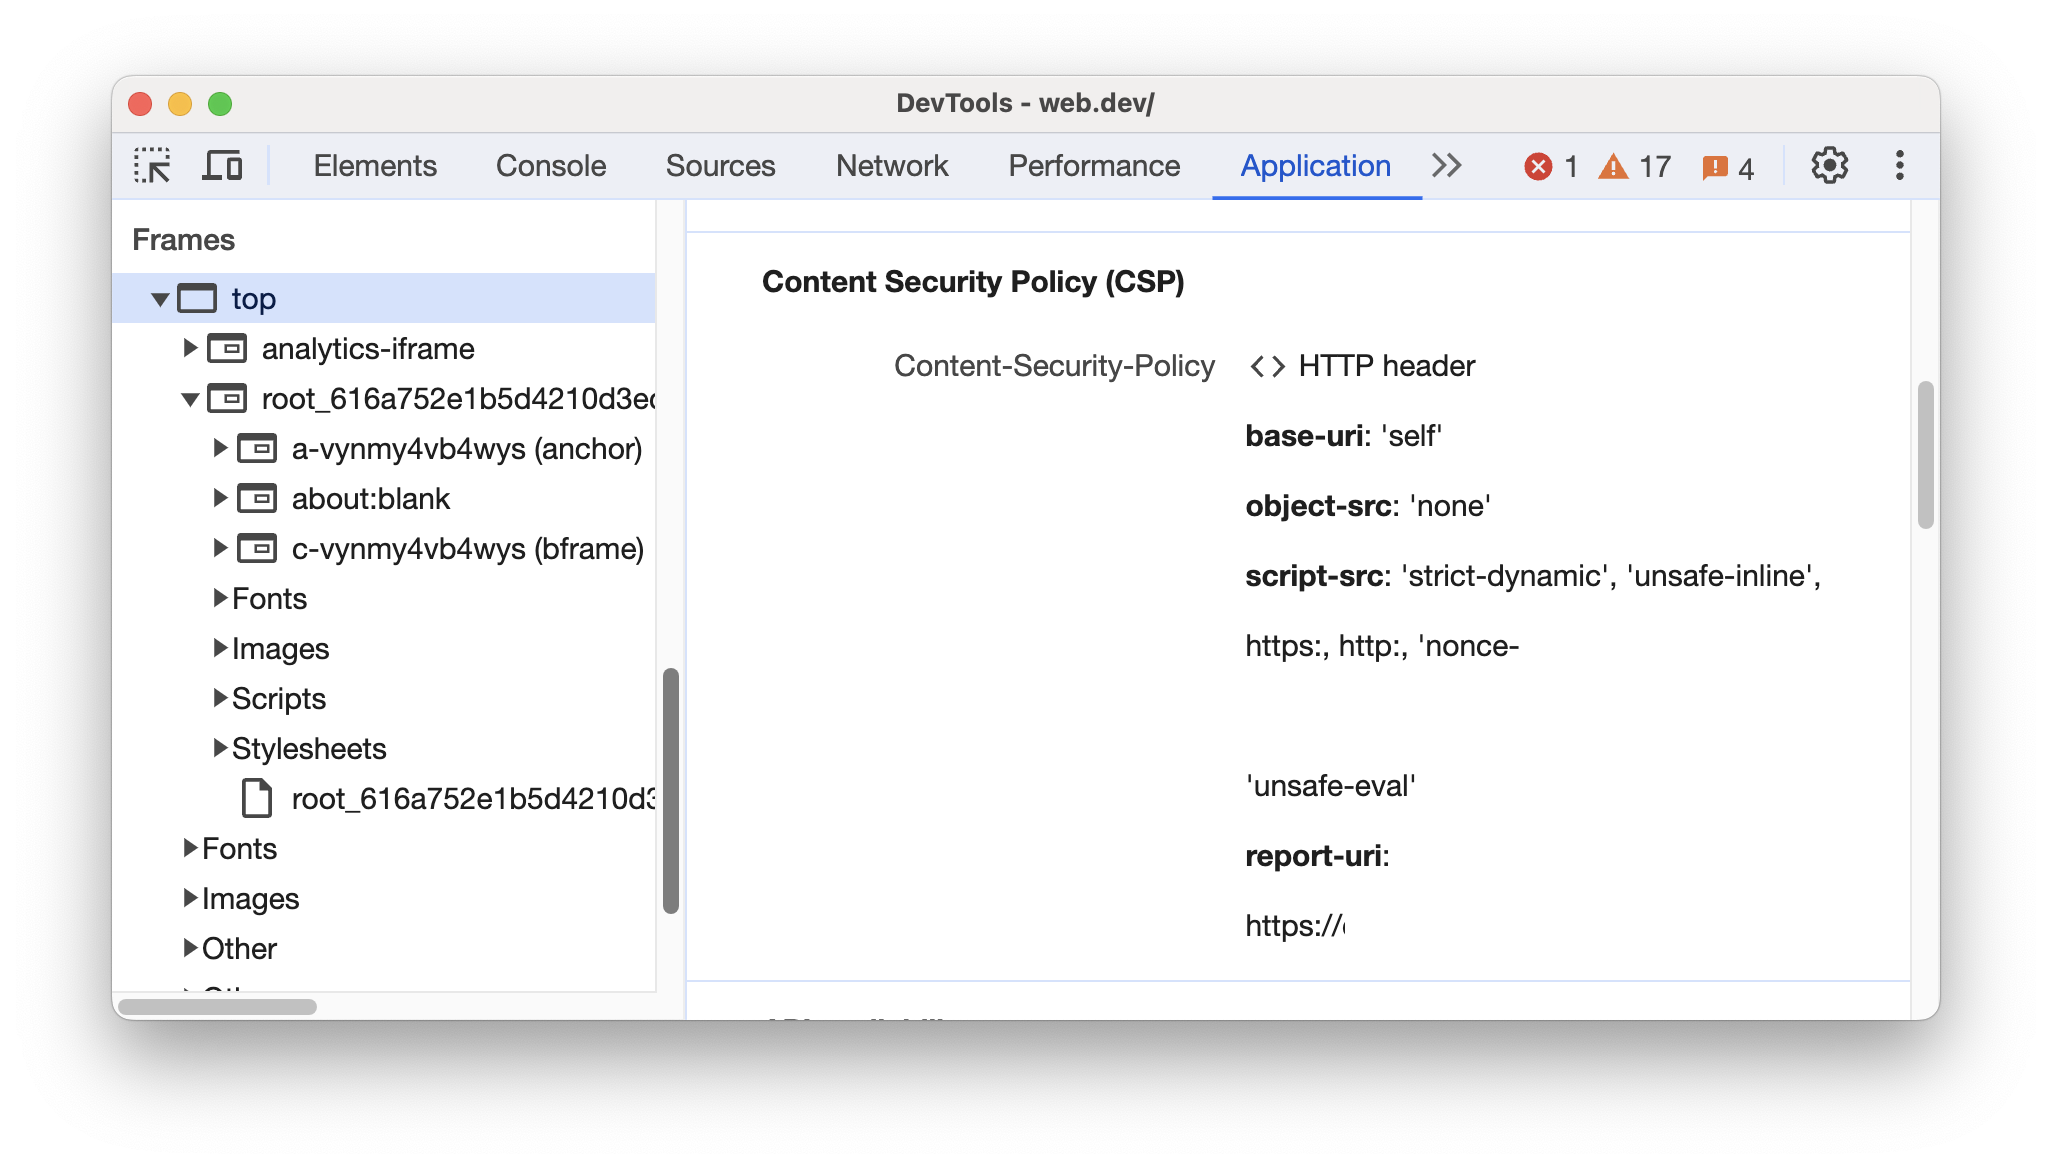 The Content Security Policy (CSP) section.